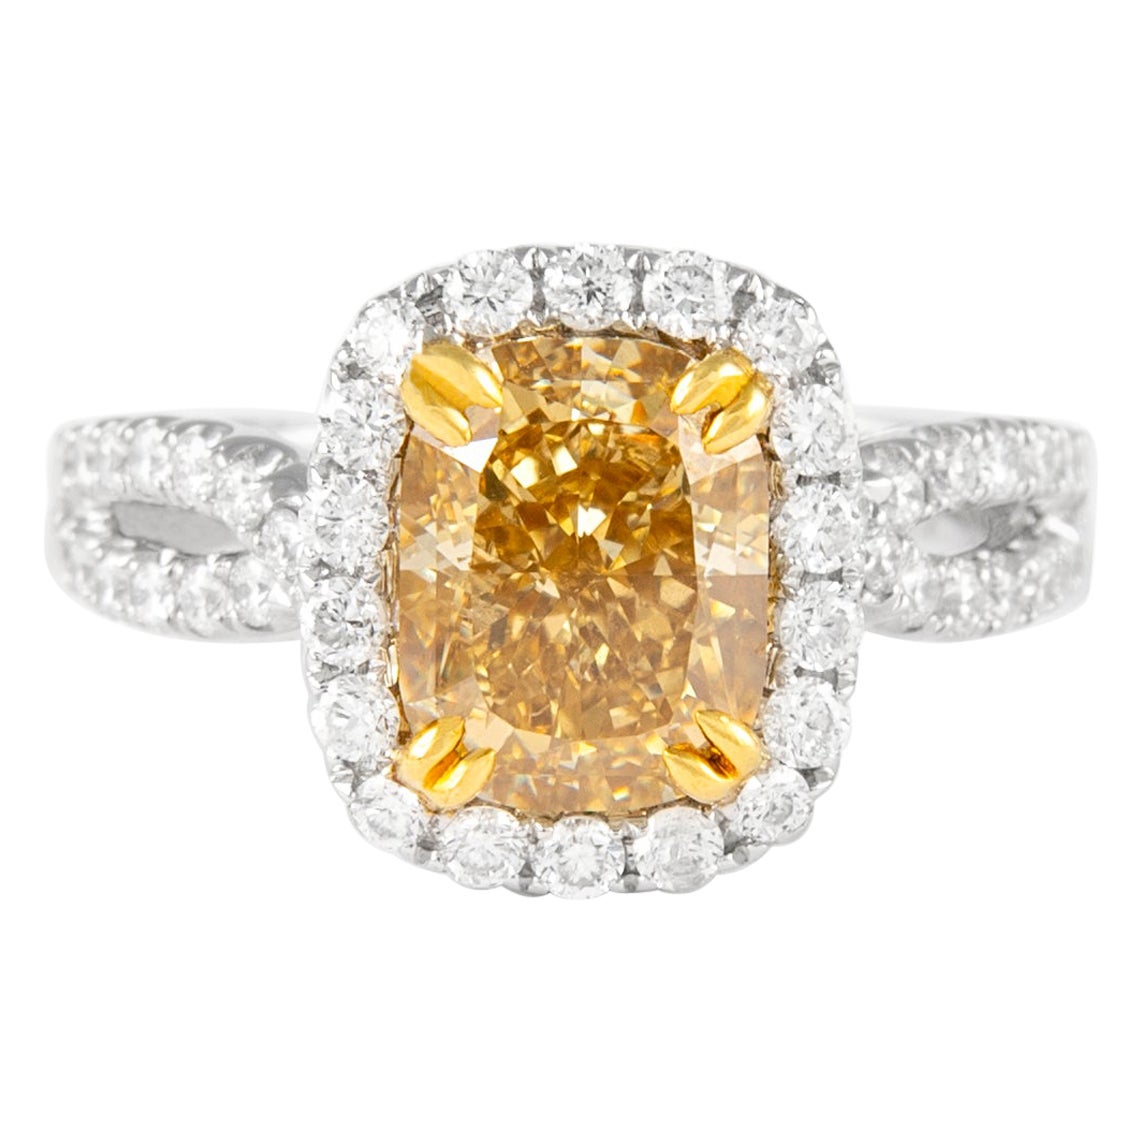 Alexander 3.07ct Fancy Yellow VS2 Cushion Diamond with Halo Ring 18k Two Tone For Sale